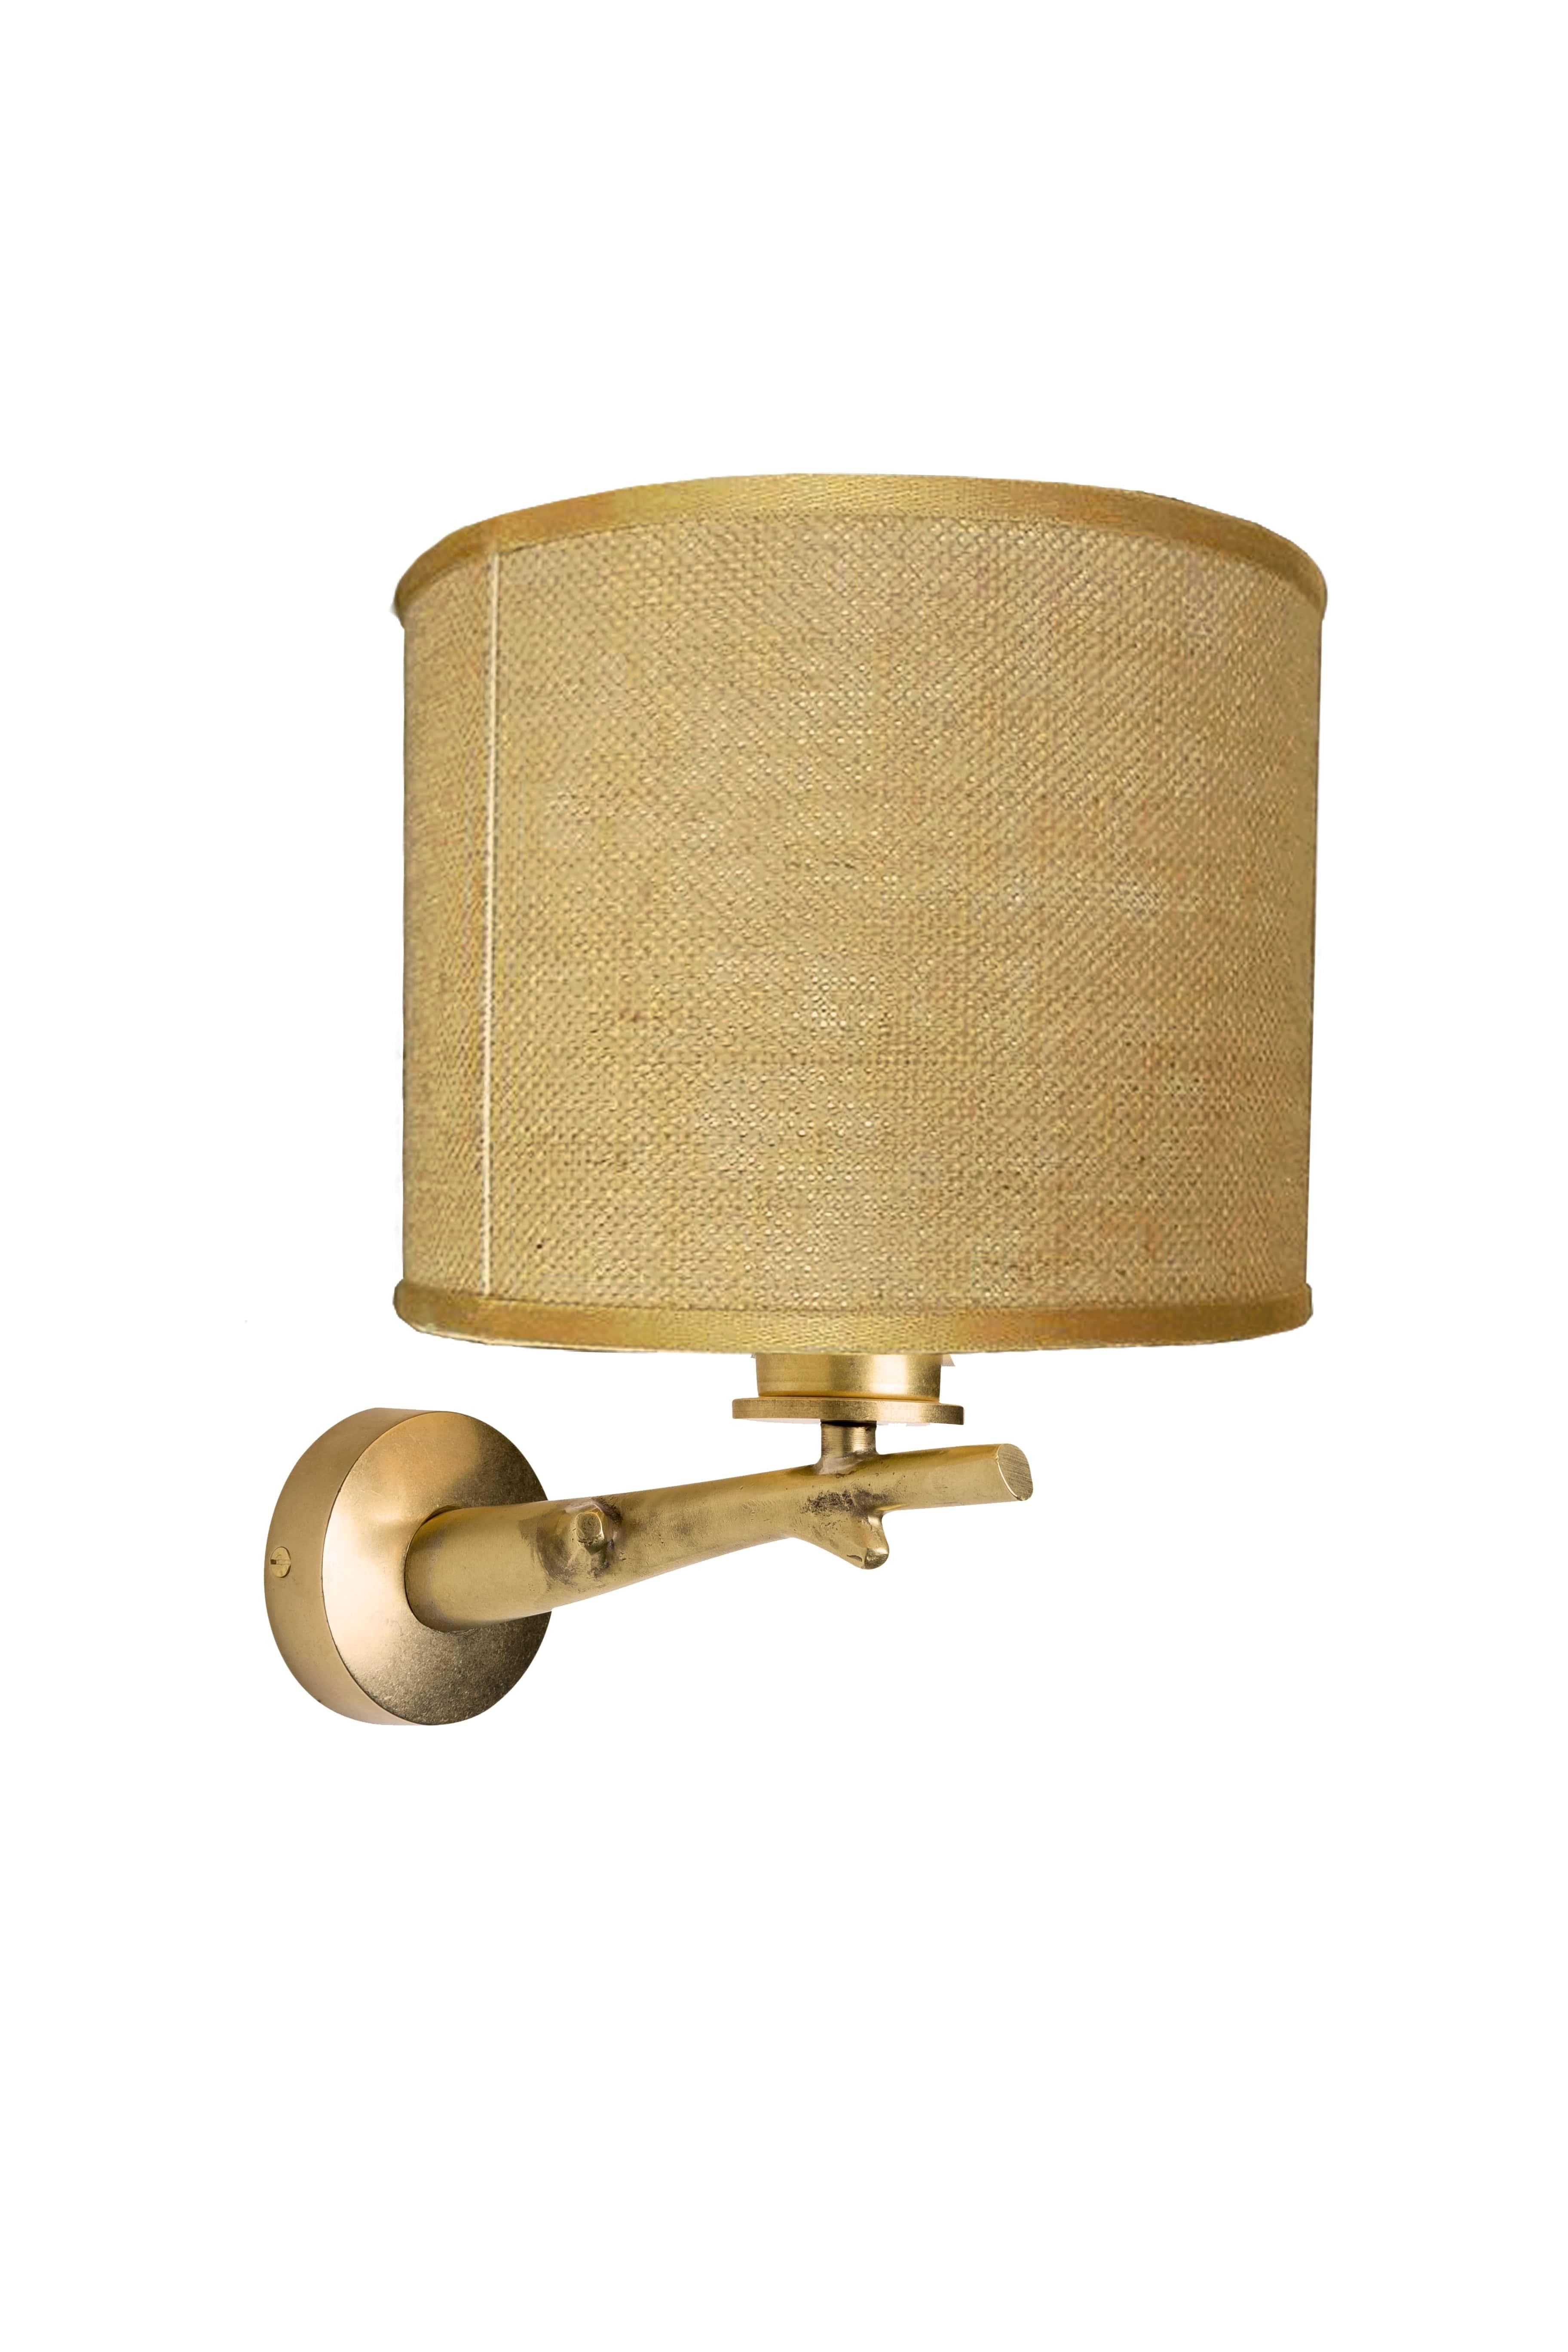 Italian Oak wall light with casting brass structure and fabric lamp shade For Sale